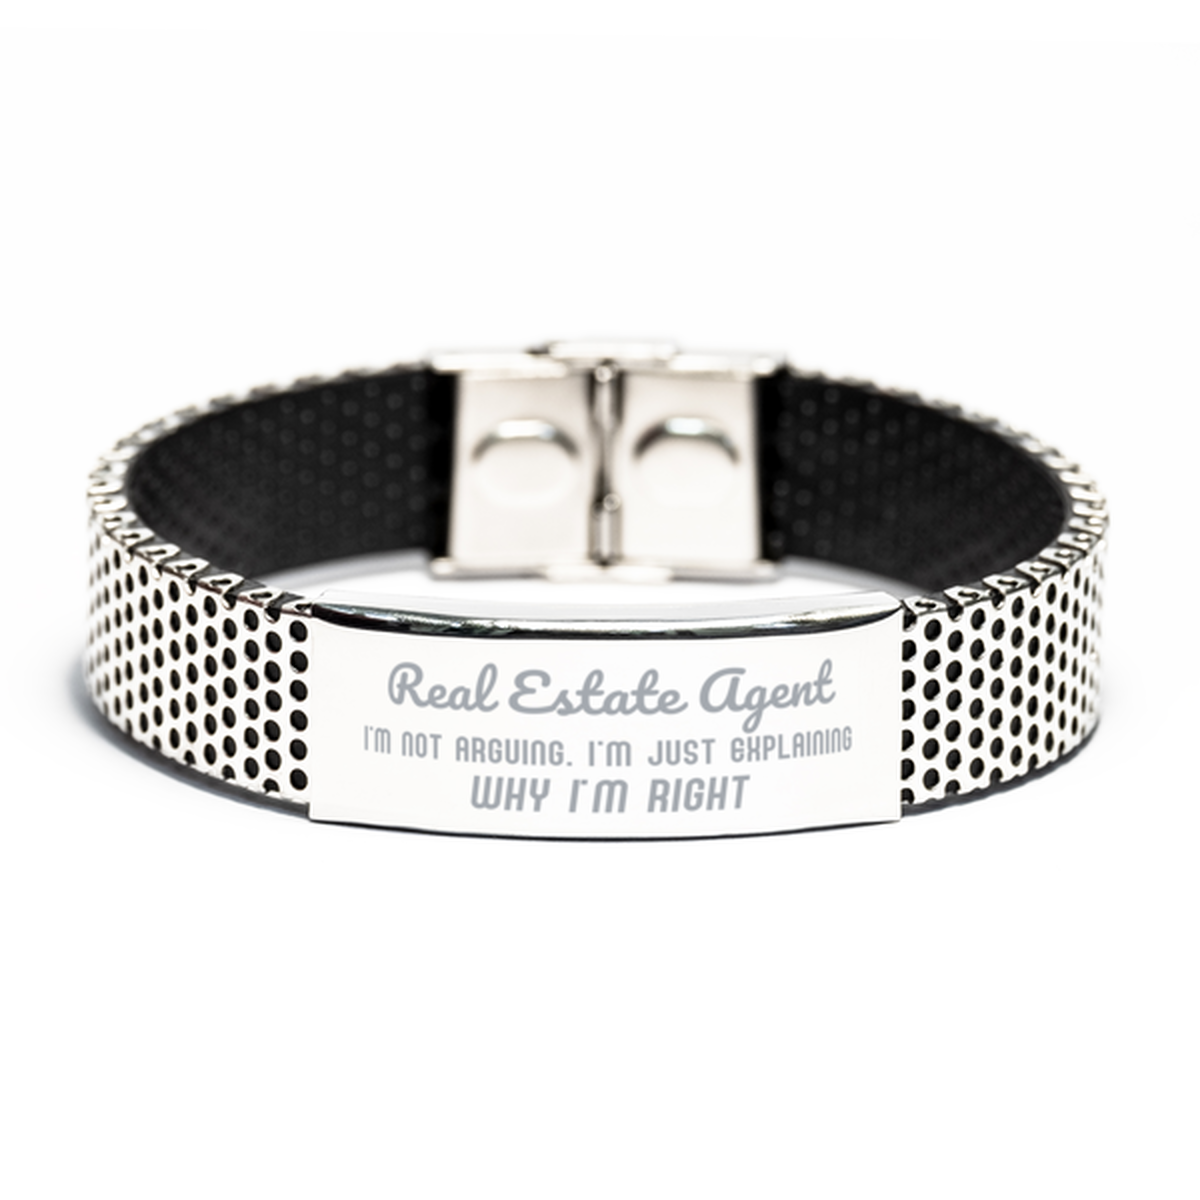 Real Estate Agent I'm not Arguing. I'm Just Explaining Why I'm RIGHT Stainless Steel Bracelet, Funny Saying Quote Real Estate Agent Gifts For Real Estate Agent Graduation Birthday Christmas Gifts for Men Women Coworker